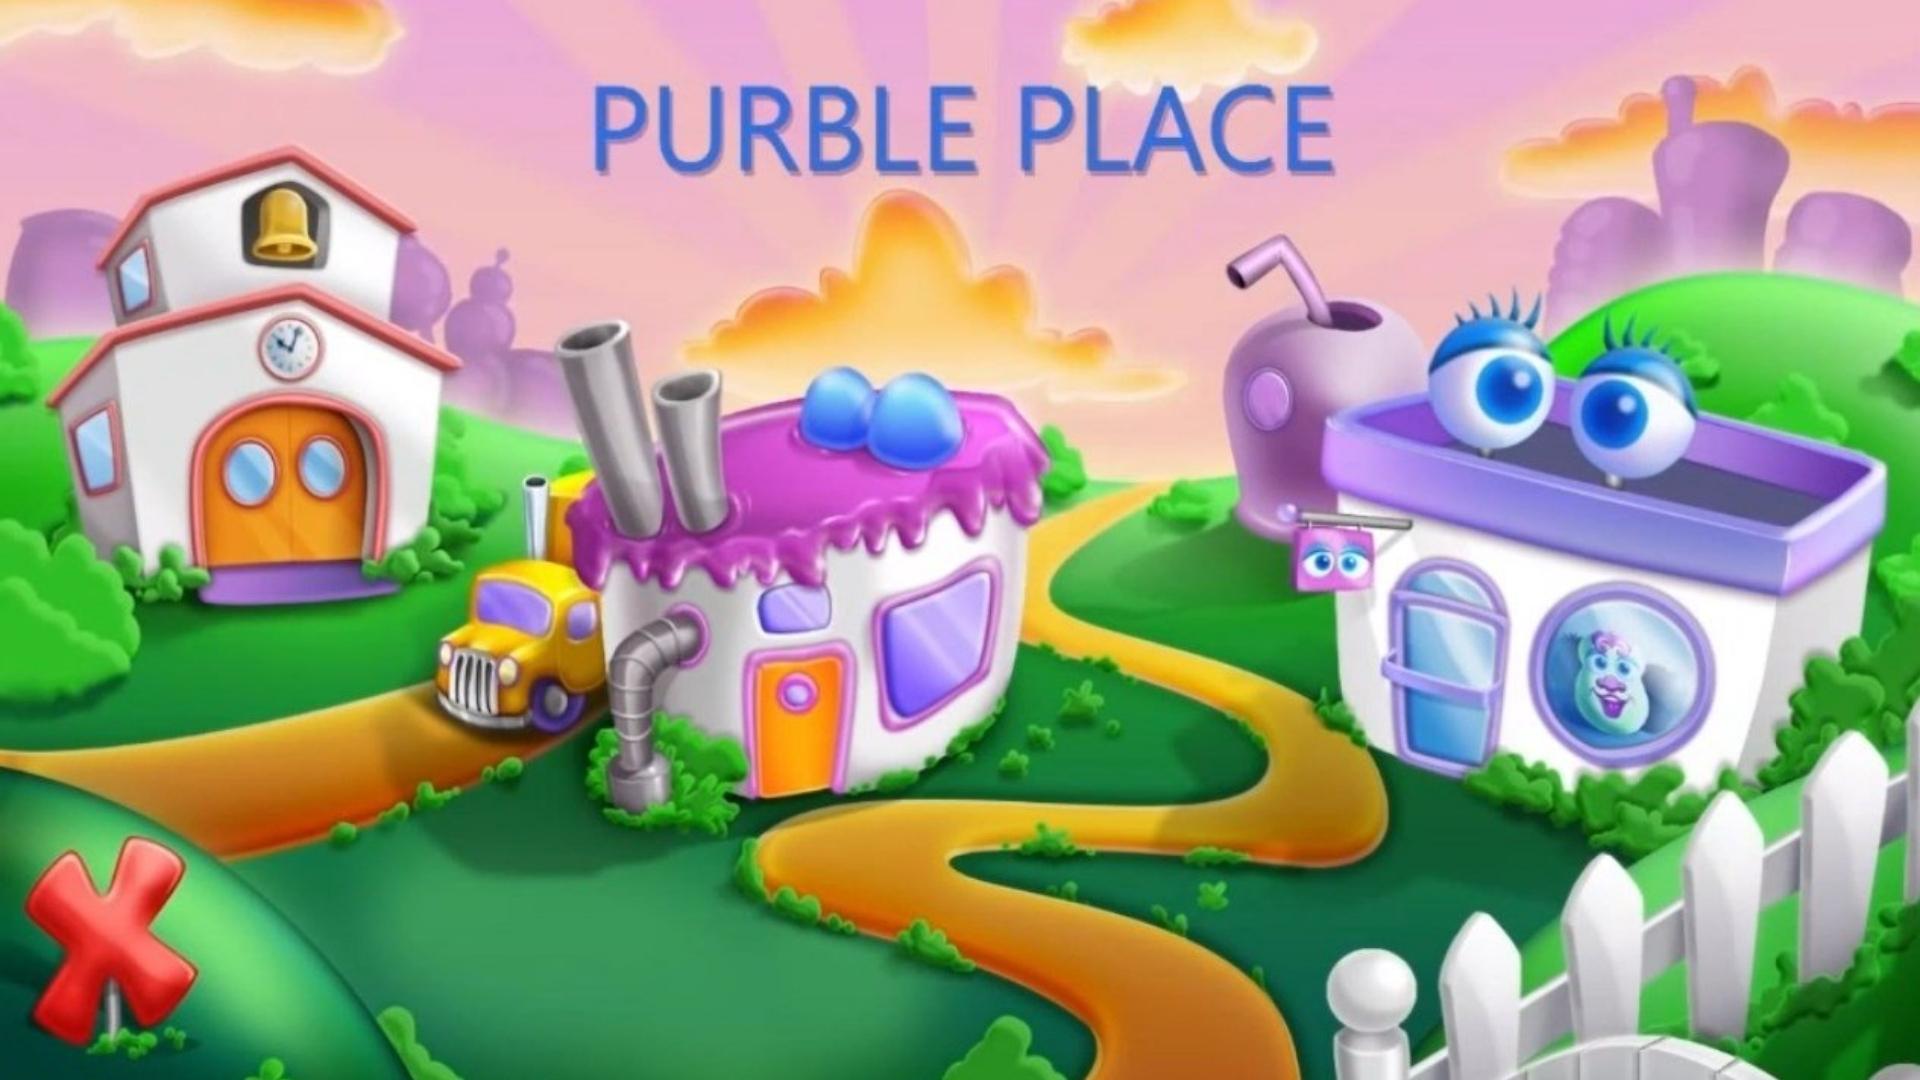 purble place games free download